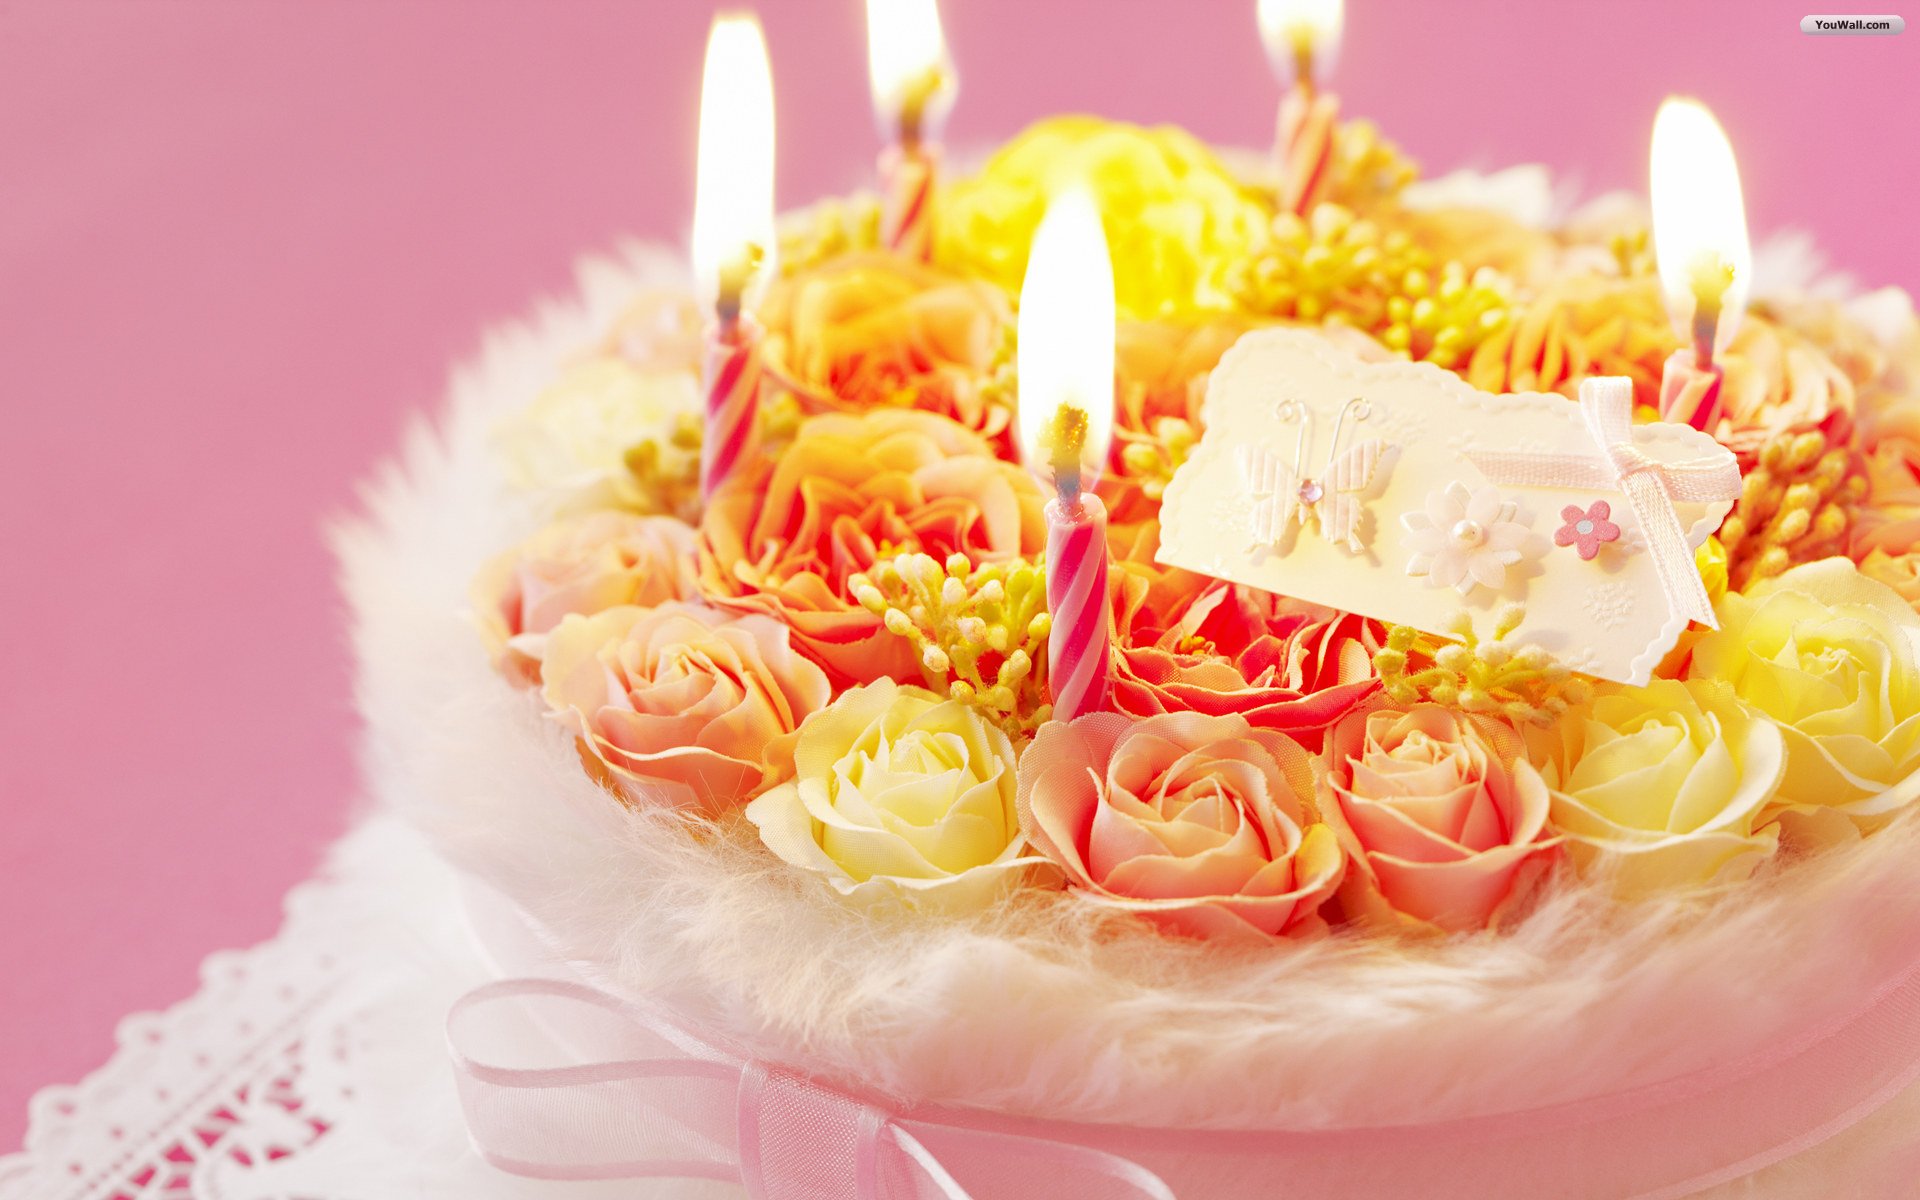 Download Wallpaper Happy Birthday - Happy Birthday Gift Images Hd , HD Wallpaper & Backgrounds